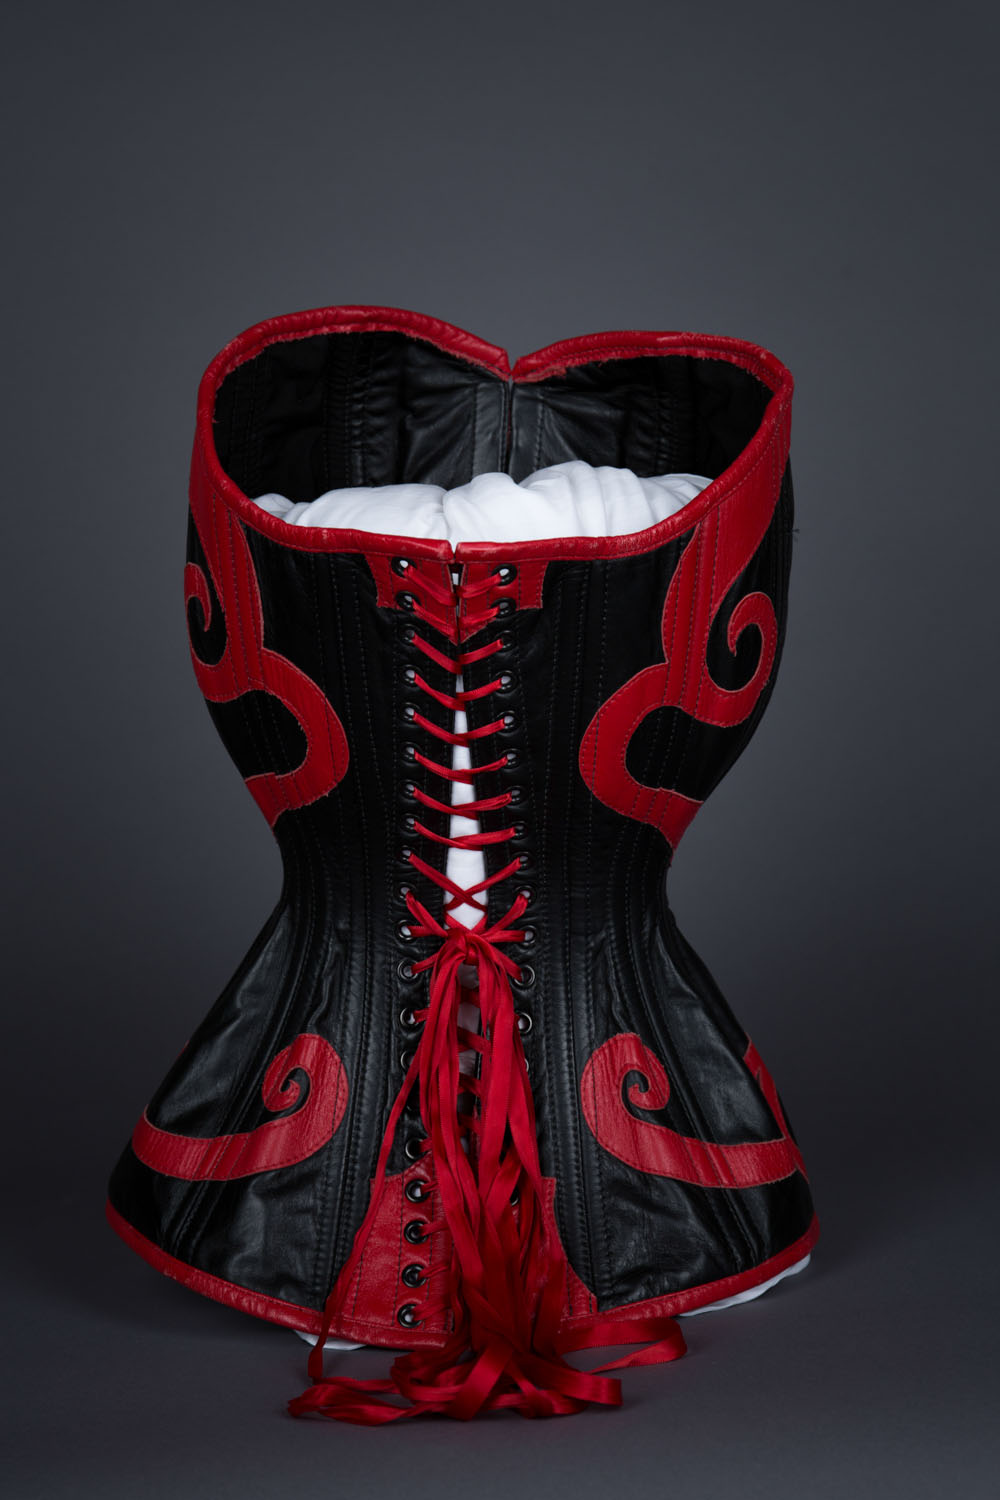 Sweetheart Victorian corset for Cathie Jung, Guinness world record by Dark Garden. The Underpinnings Musuem. Photography by Tigz Rice